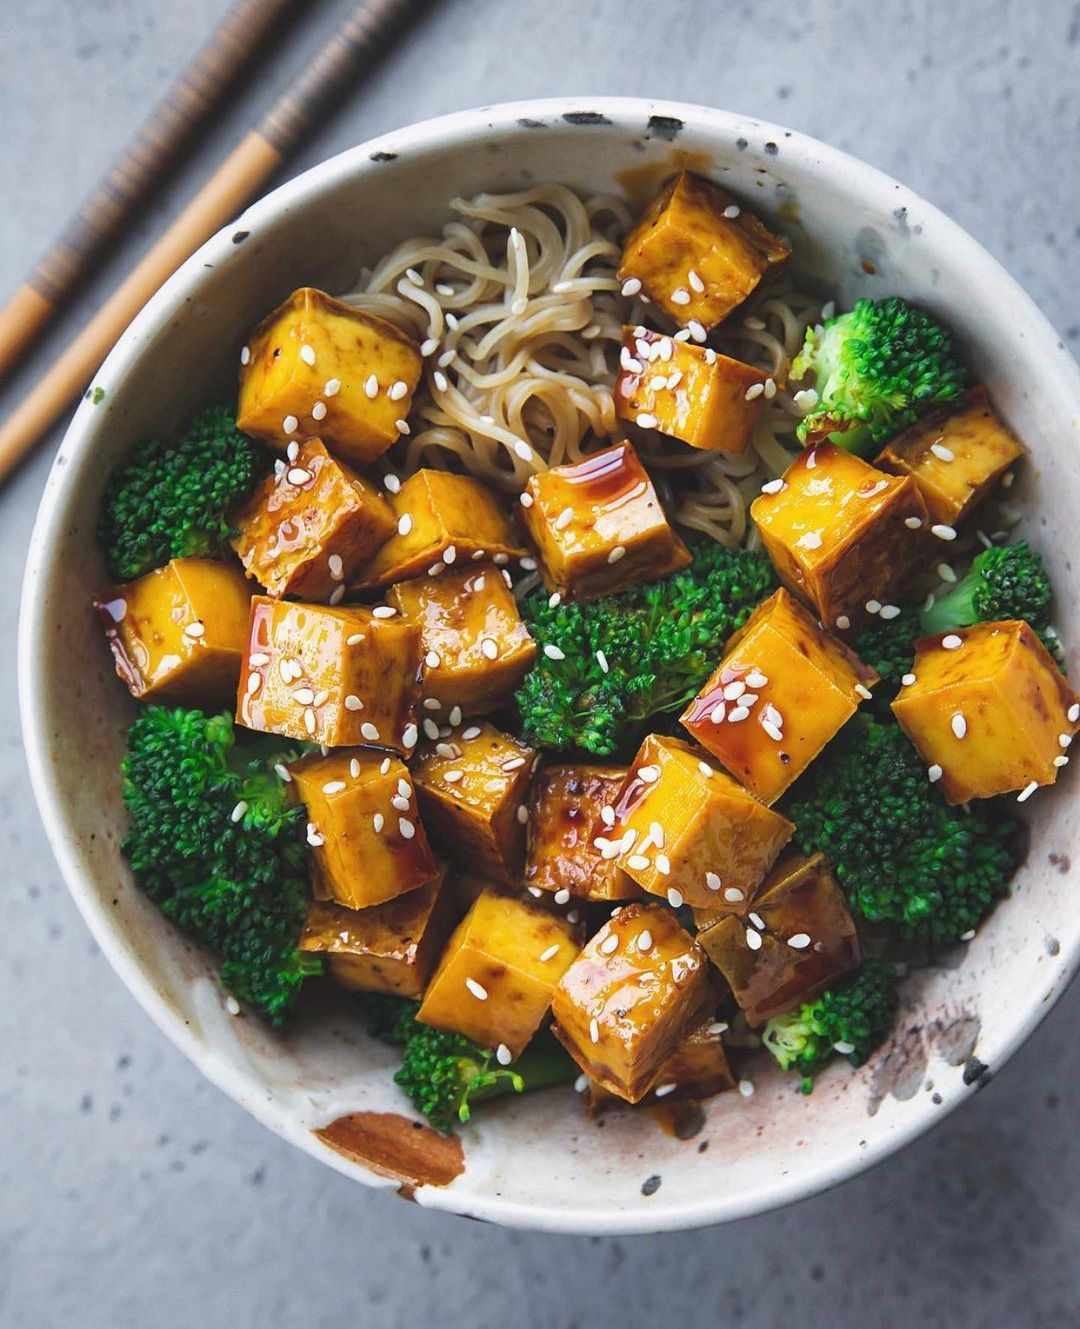 Easy Bowl with Some Sticky Tofu, Broccoli and Ramen Noodles